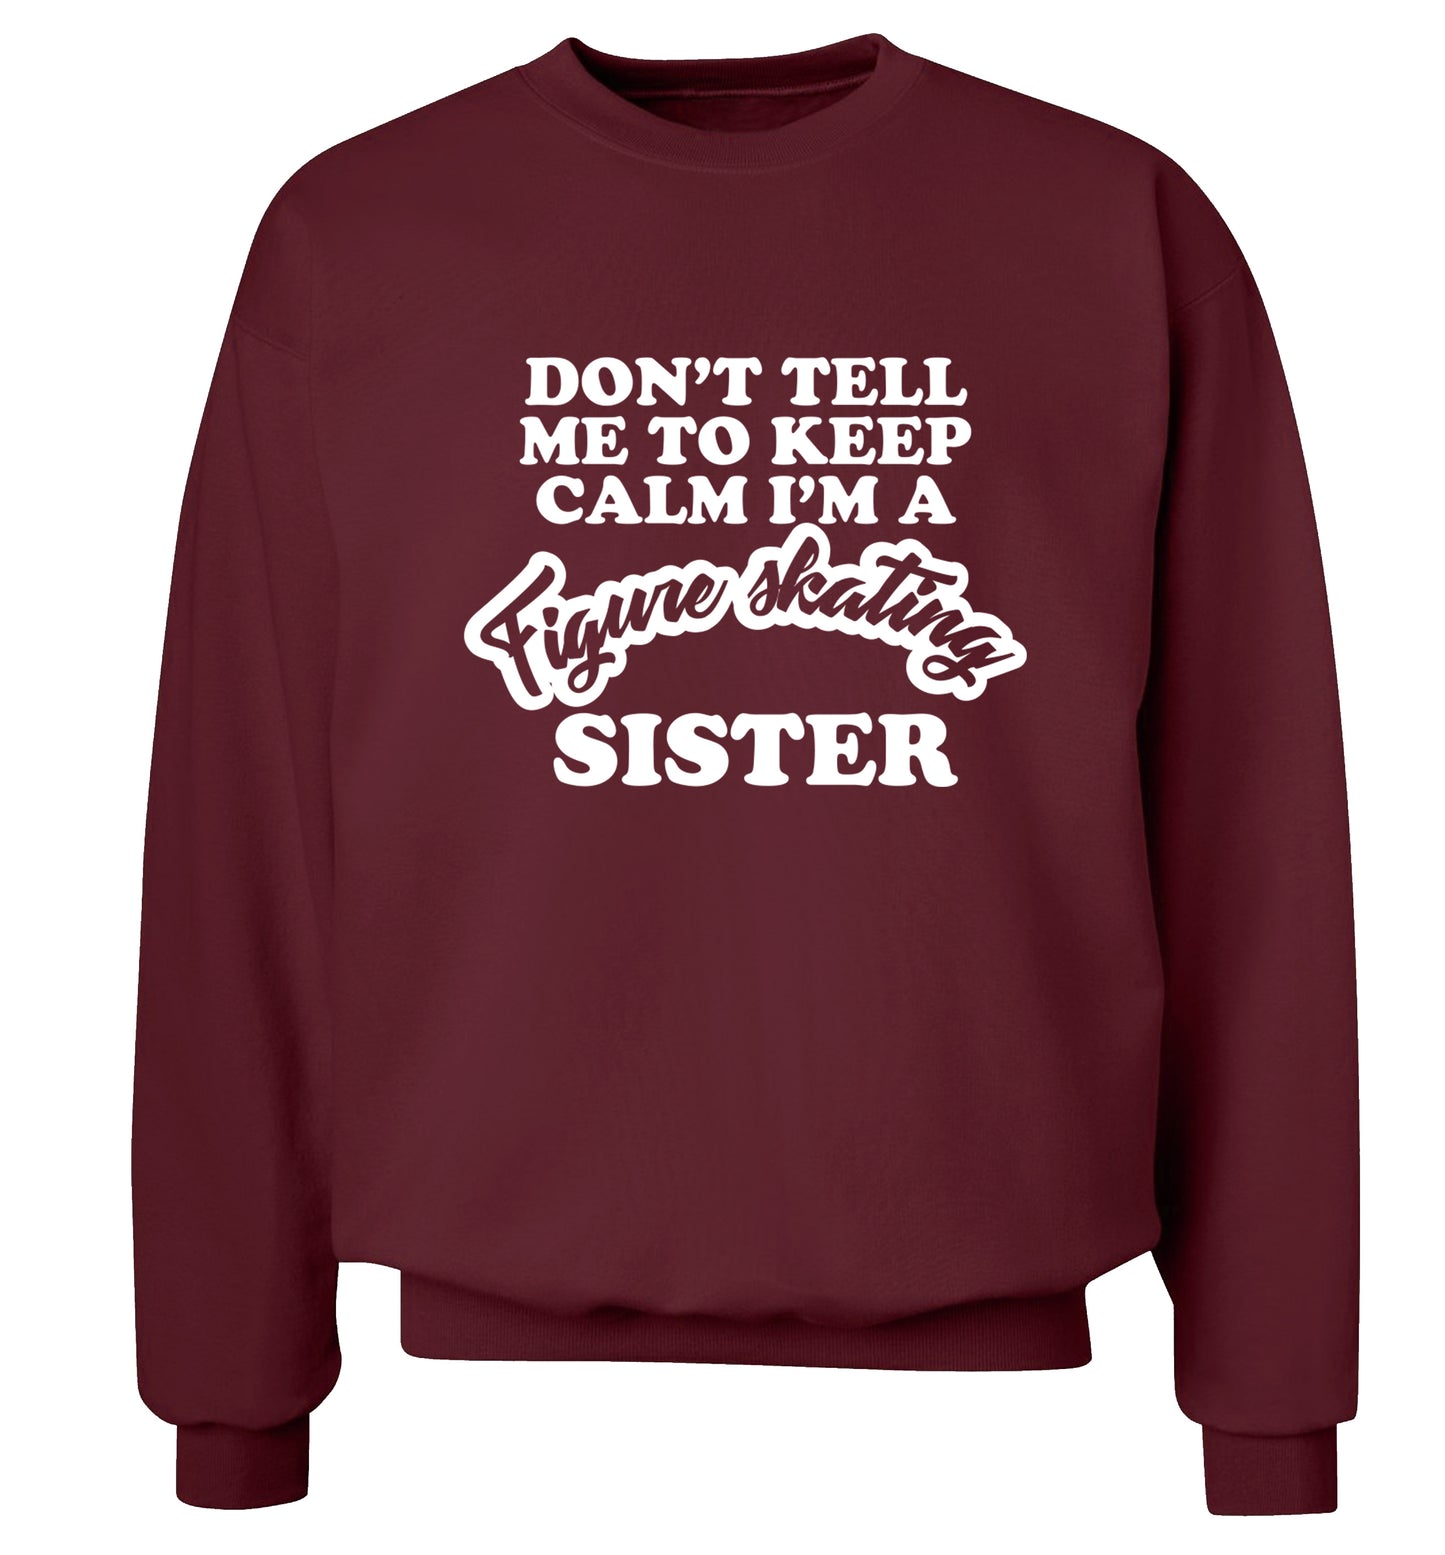 Don't tell me to keep calm I'm a figure skating sister Adult's unisexmaroon Sweater 2XL